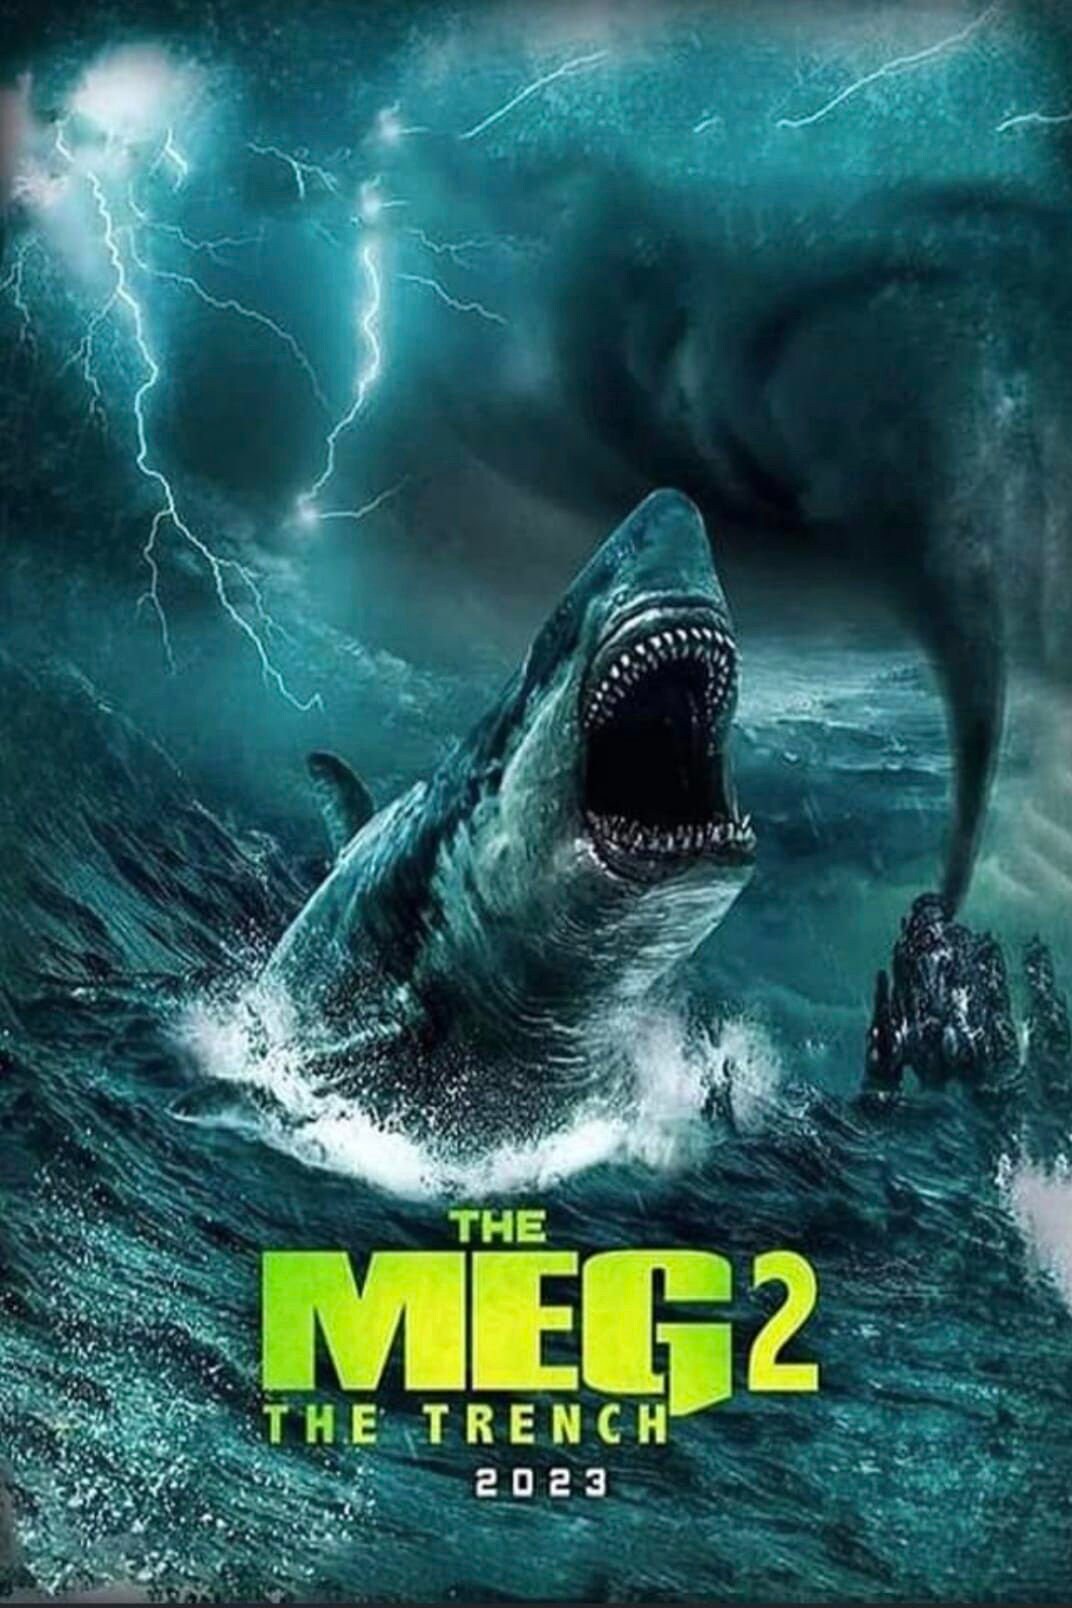 The Meg2 the Trench, 2023 Boxoffice Hit Movie Jason Statham Movie, Poster  and High Quality Digital Download, Blockbuster Movie Posters 